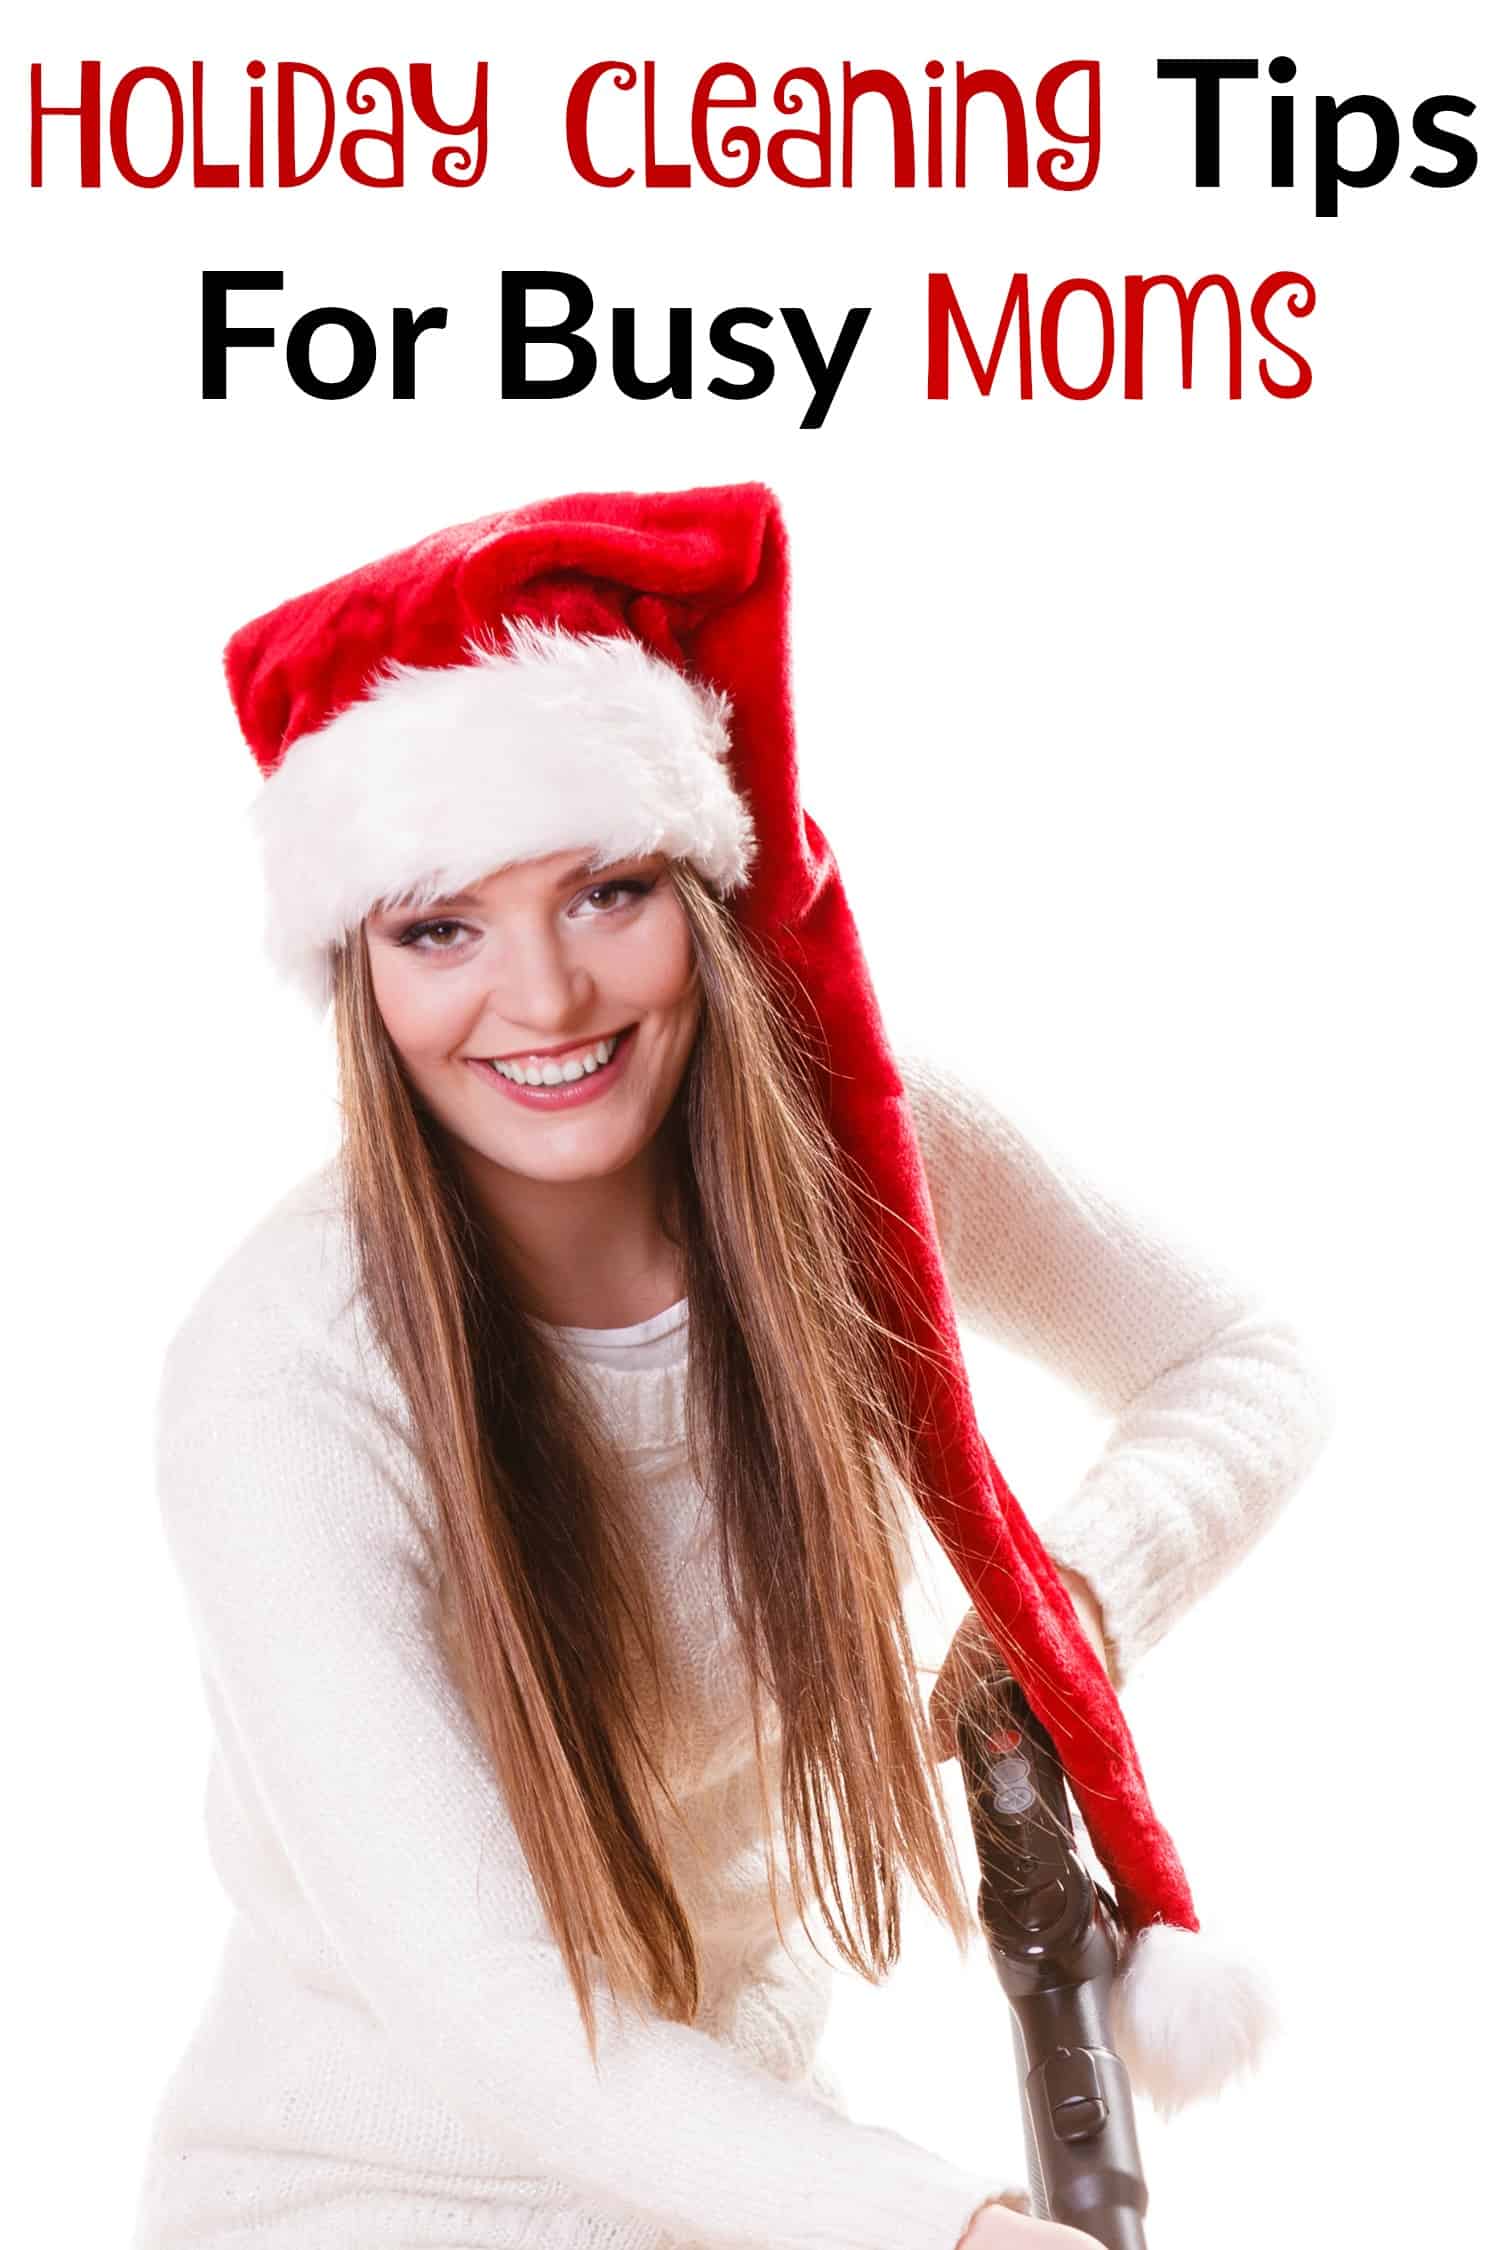 Holiday Cleaning Tips For Busy Moms